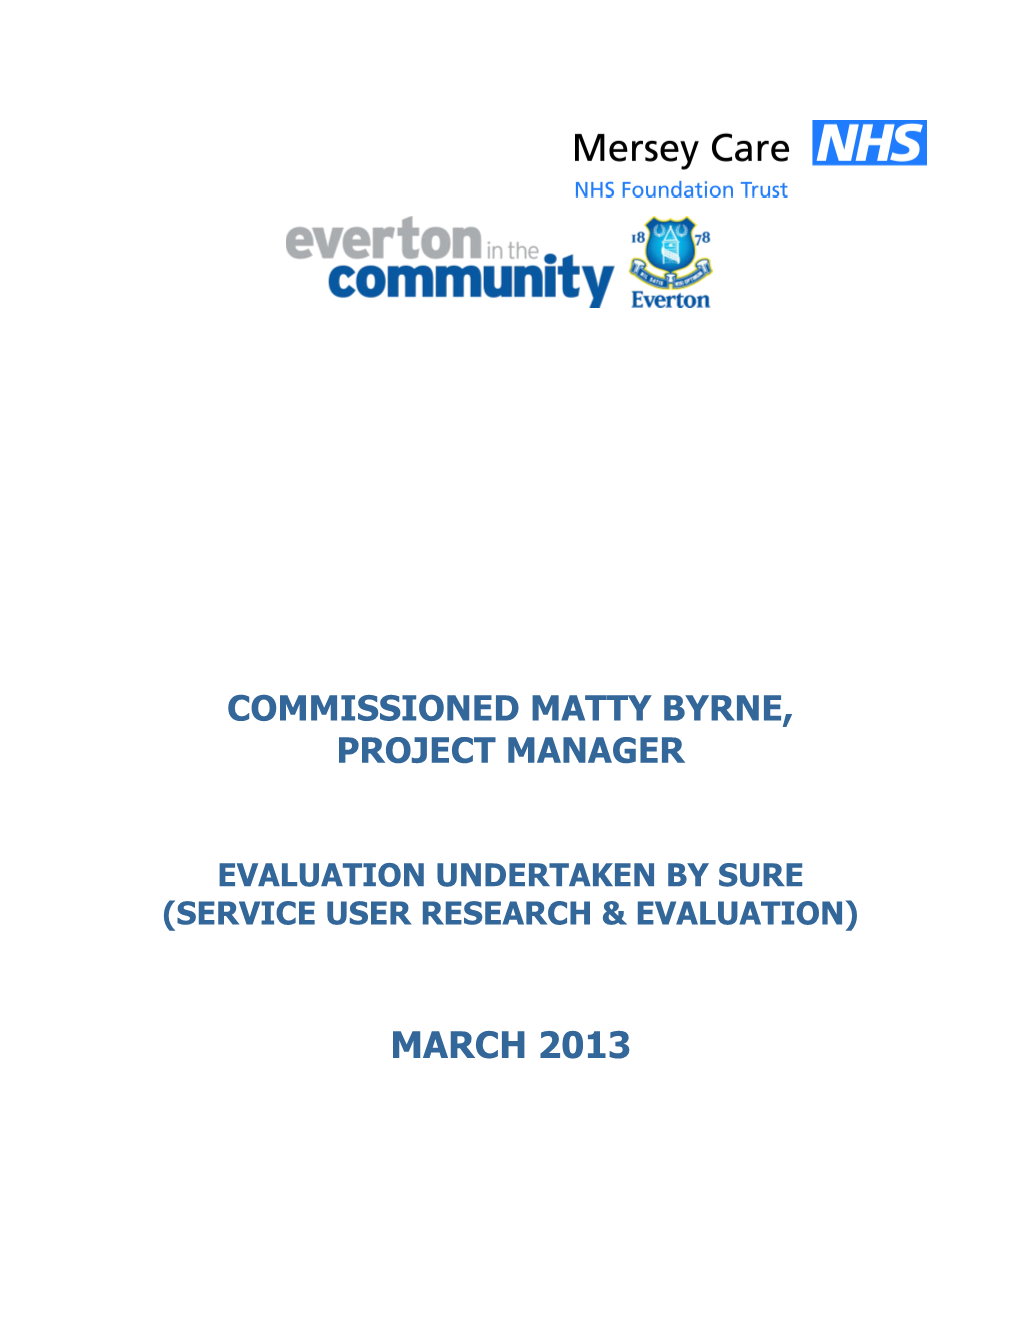 Commissioned Matty Byrne, Project Manager